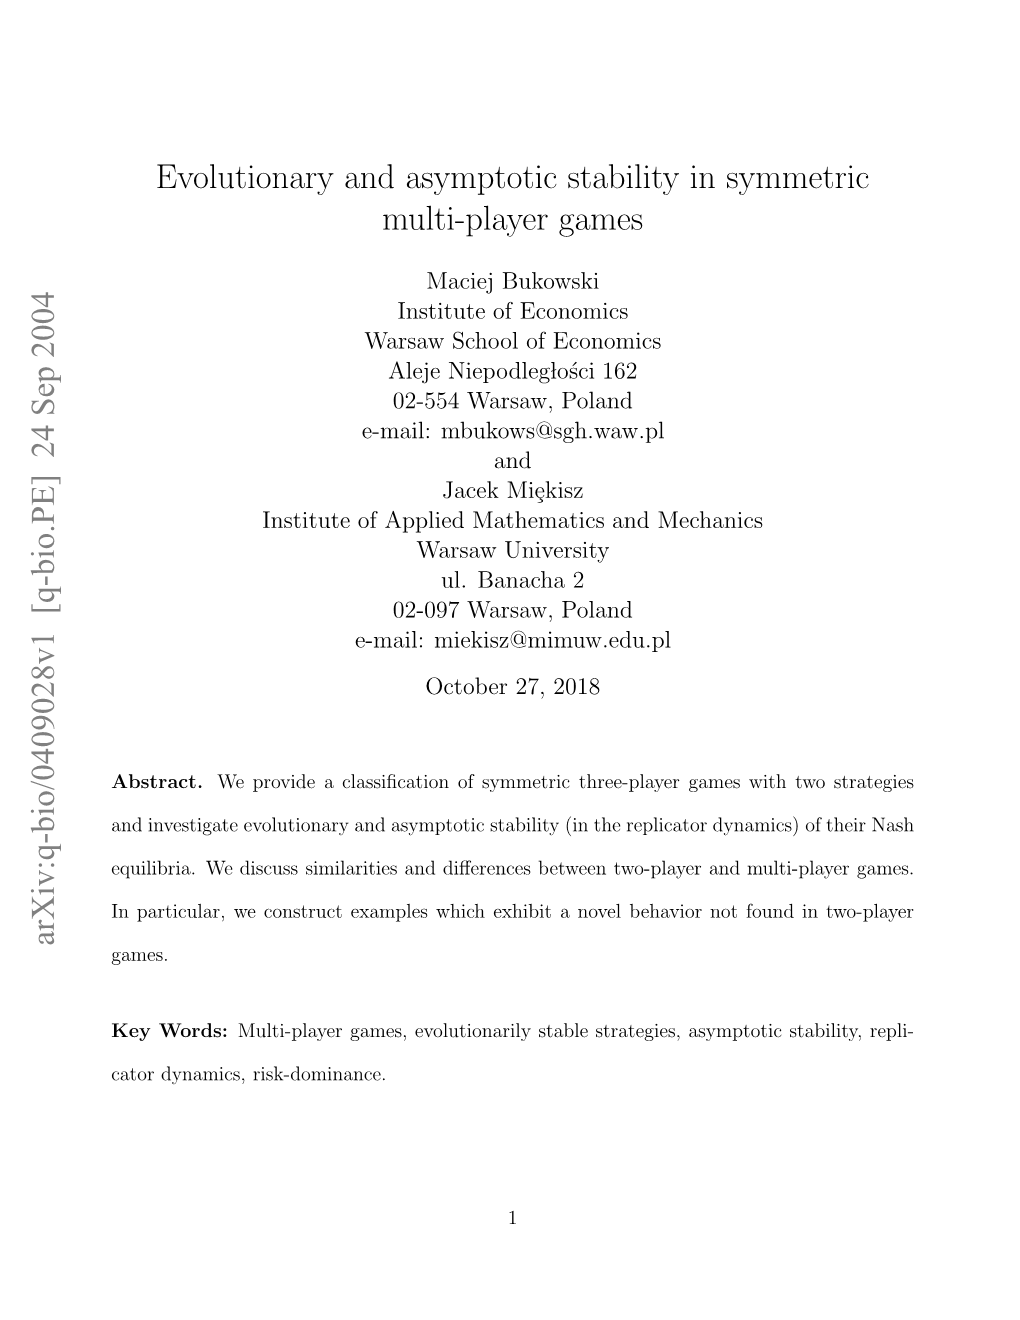 Evolutionary and Asymptotic Stability in Symmetric Multi-Player Games